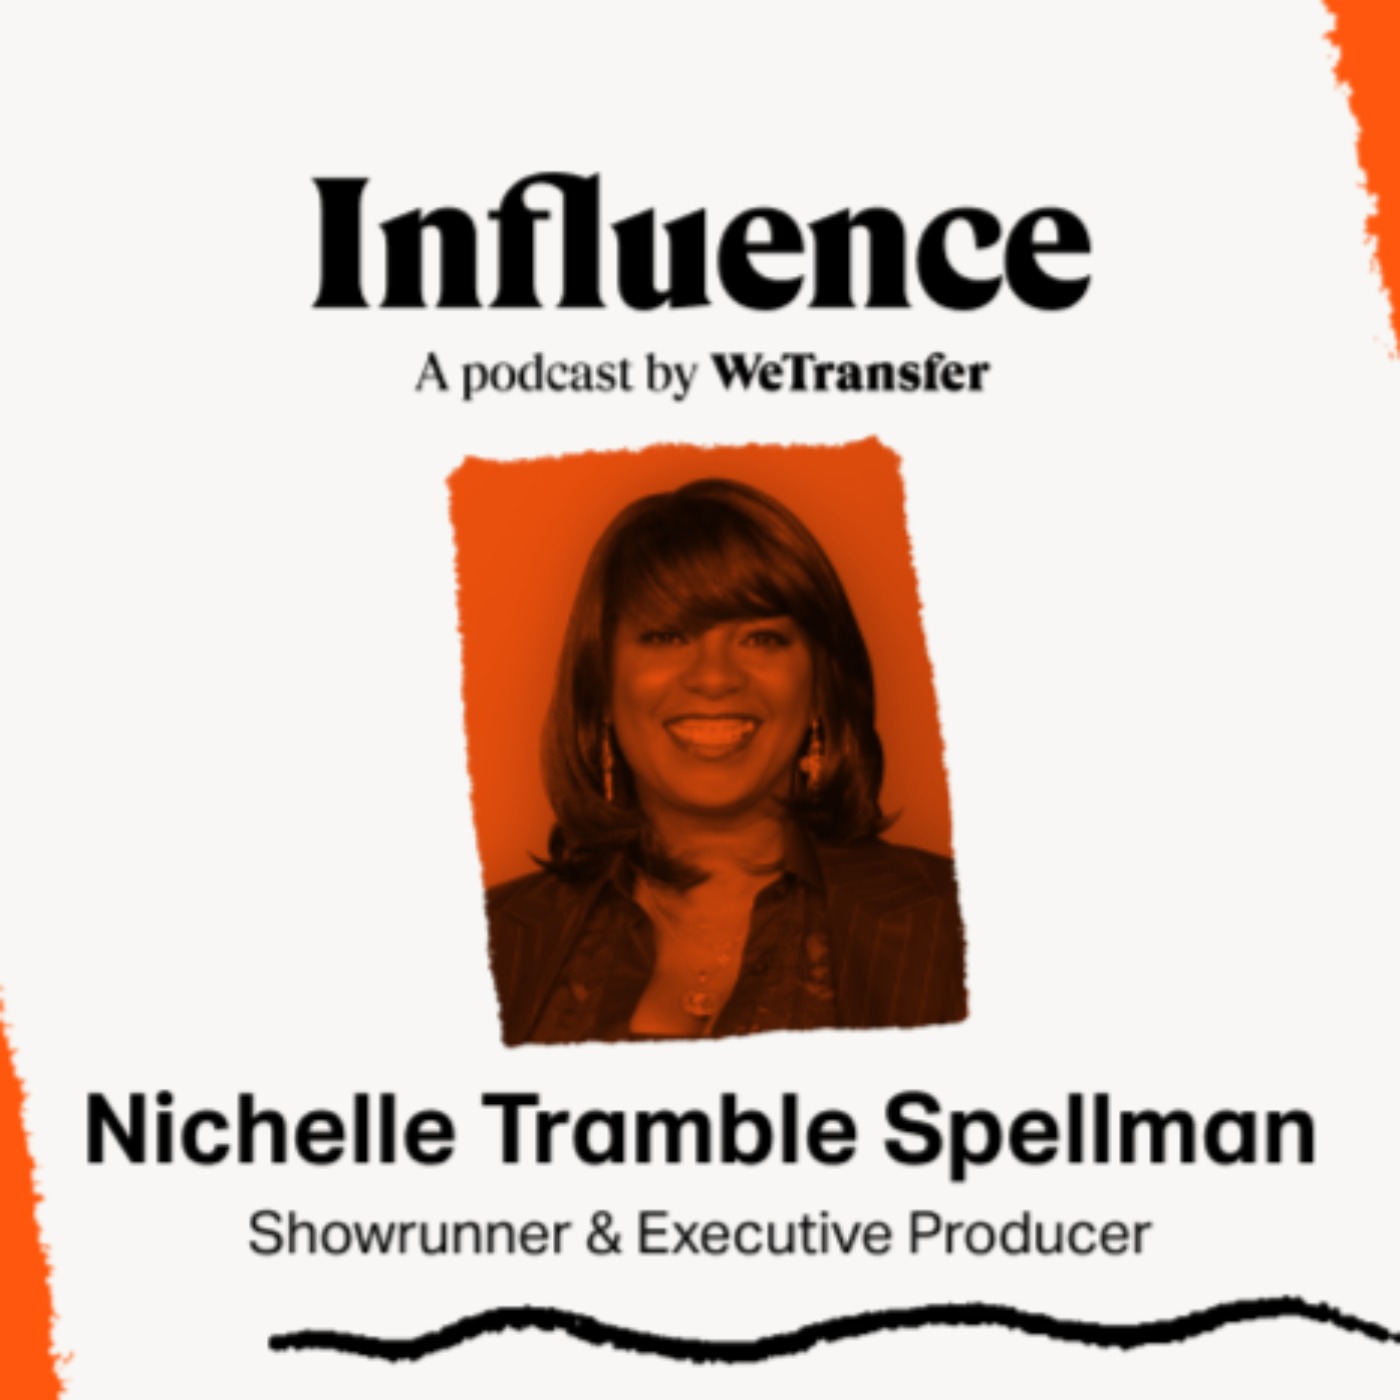 Nichelle Tramble Spellman on the Writer’s Responsibility and Representation in Hollywood